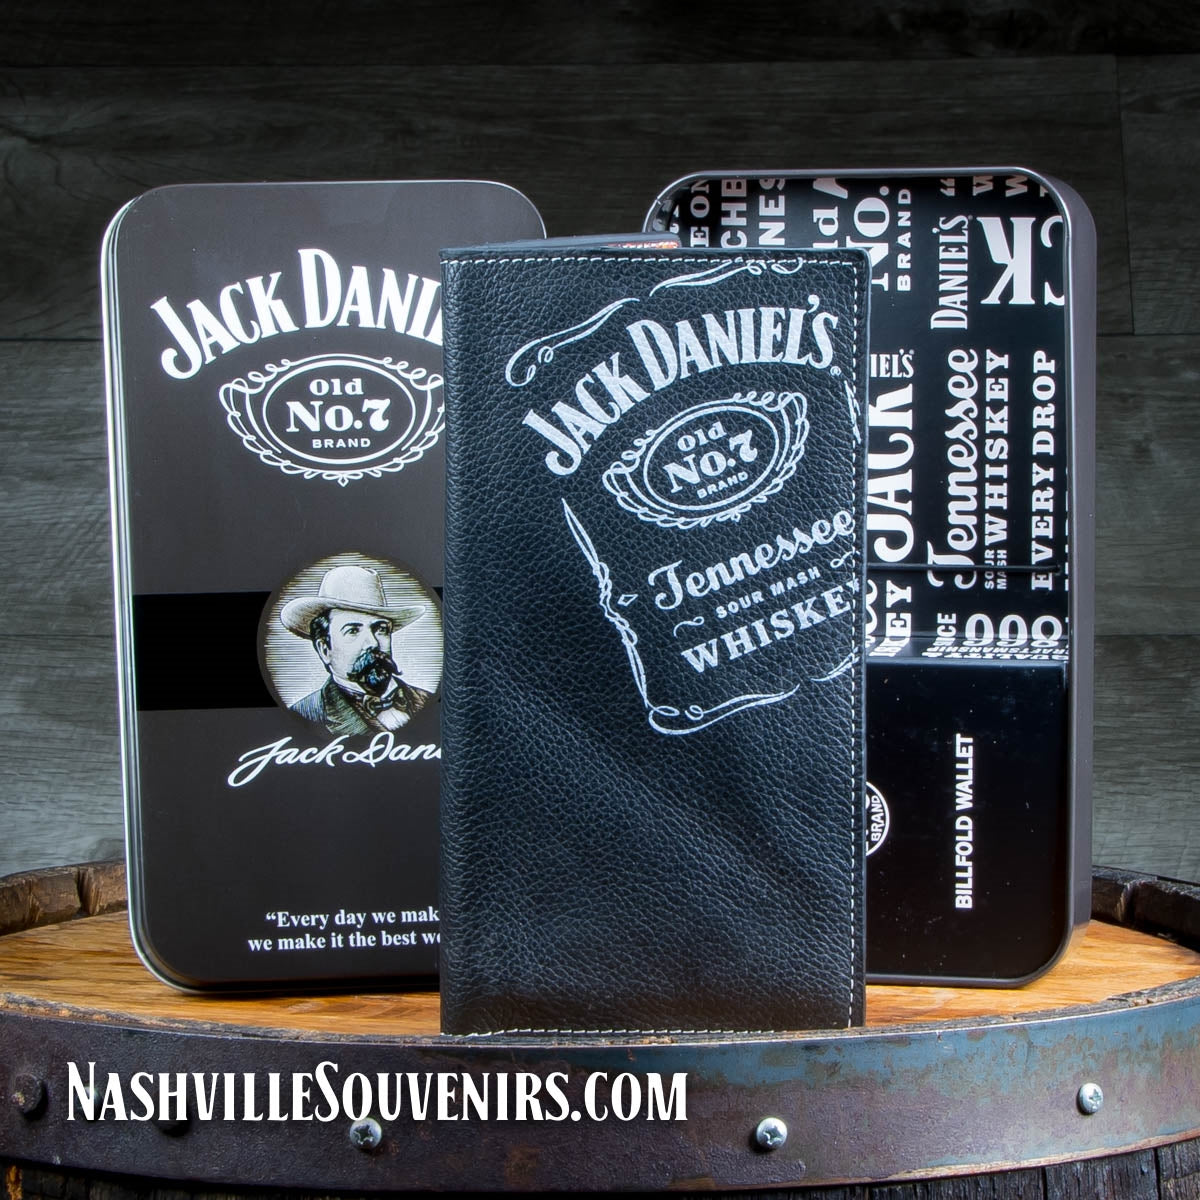 Officially licensed Jack Daniels Black Rodeo Wallet Embossed Logo. Get one today with FREE SHIPPING on all US orders over $75! Full color barrel house images inside the wallet.